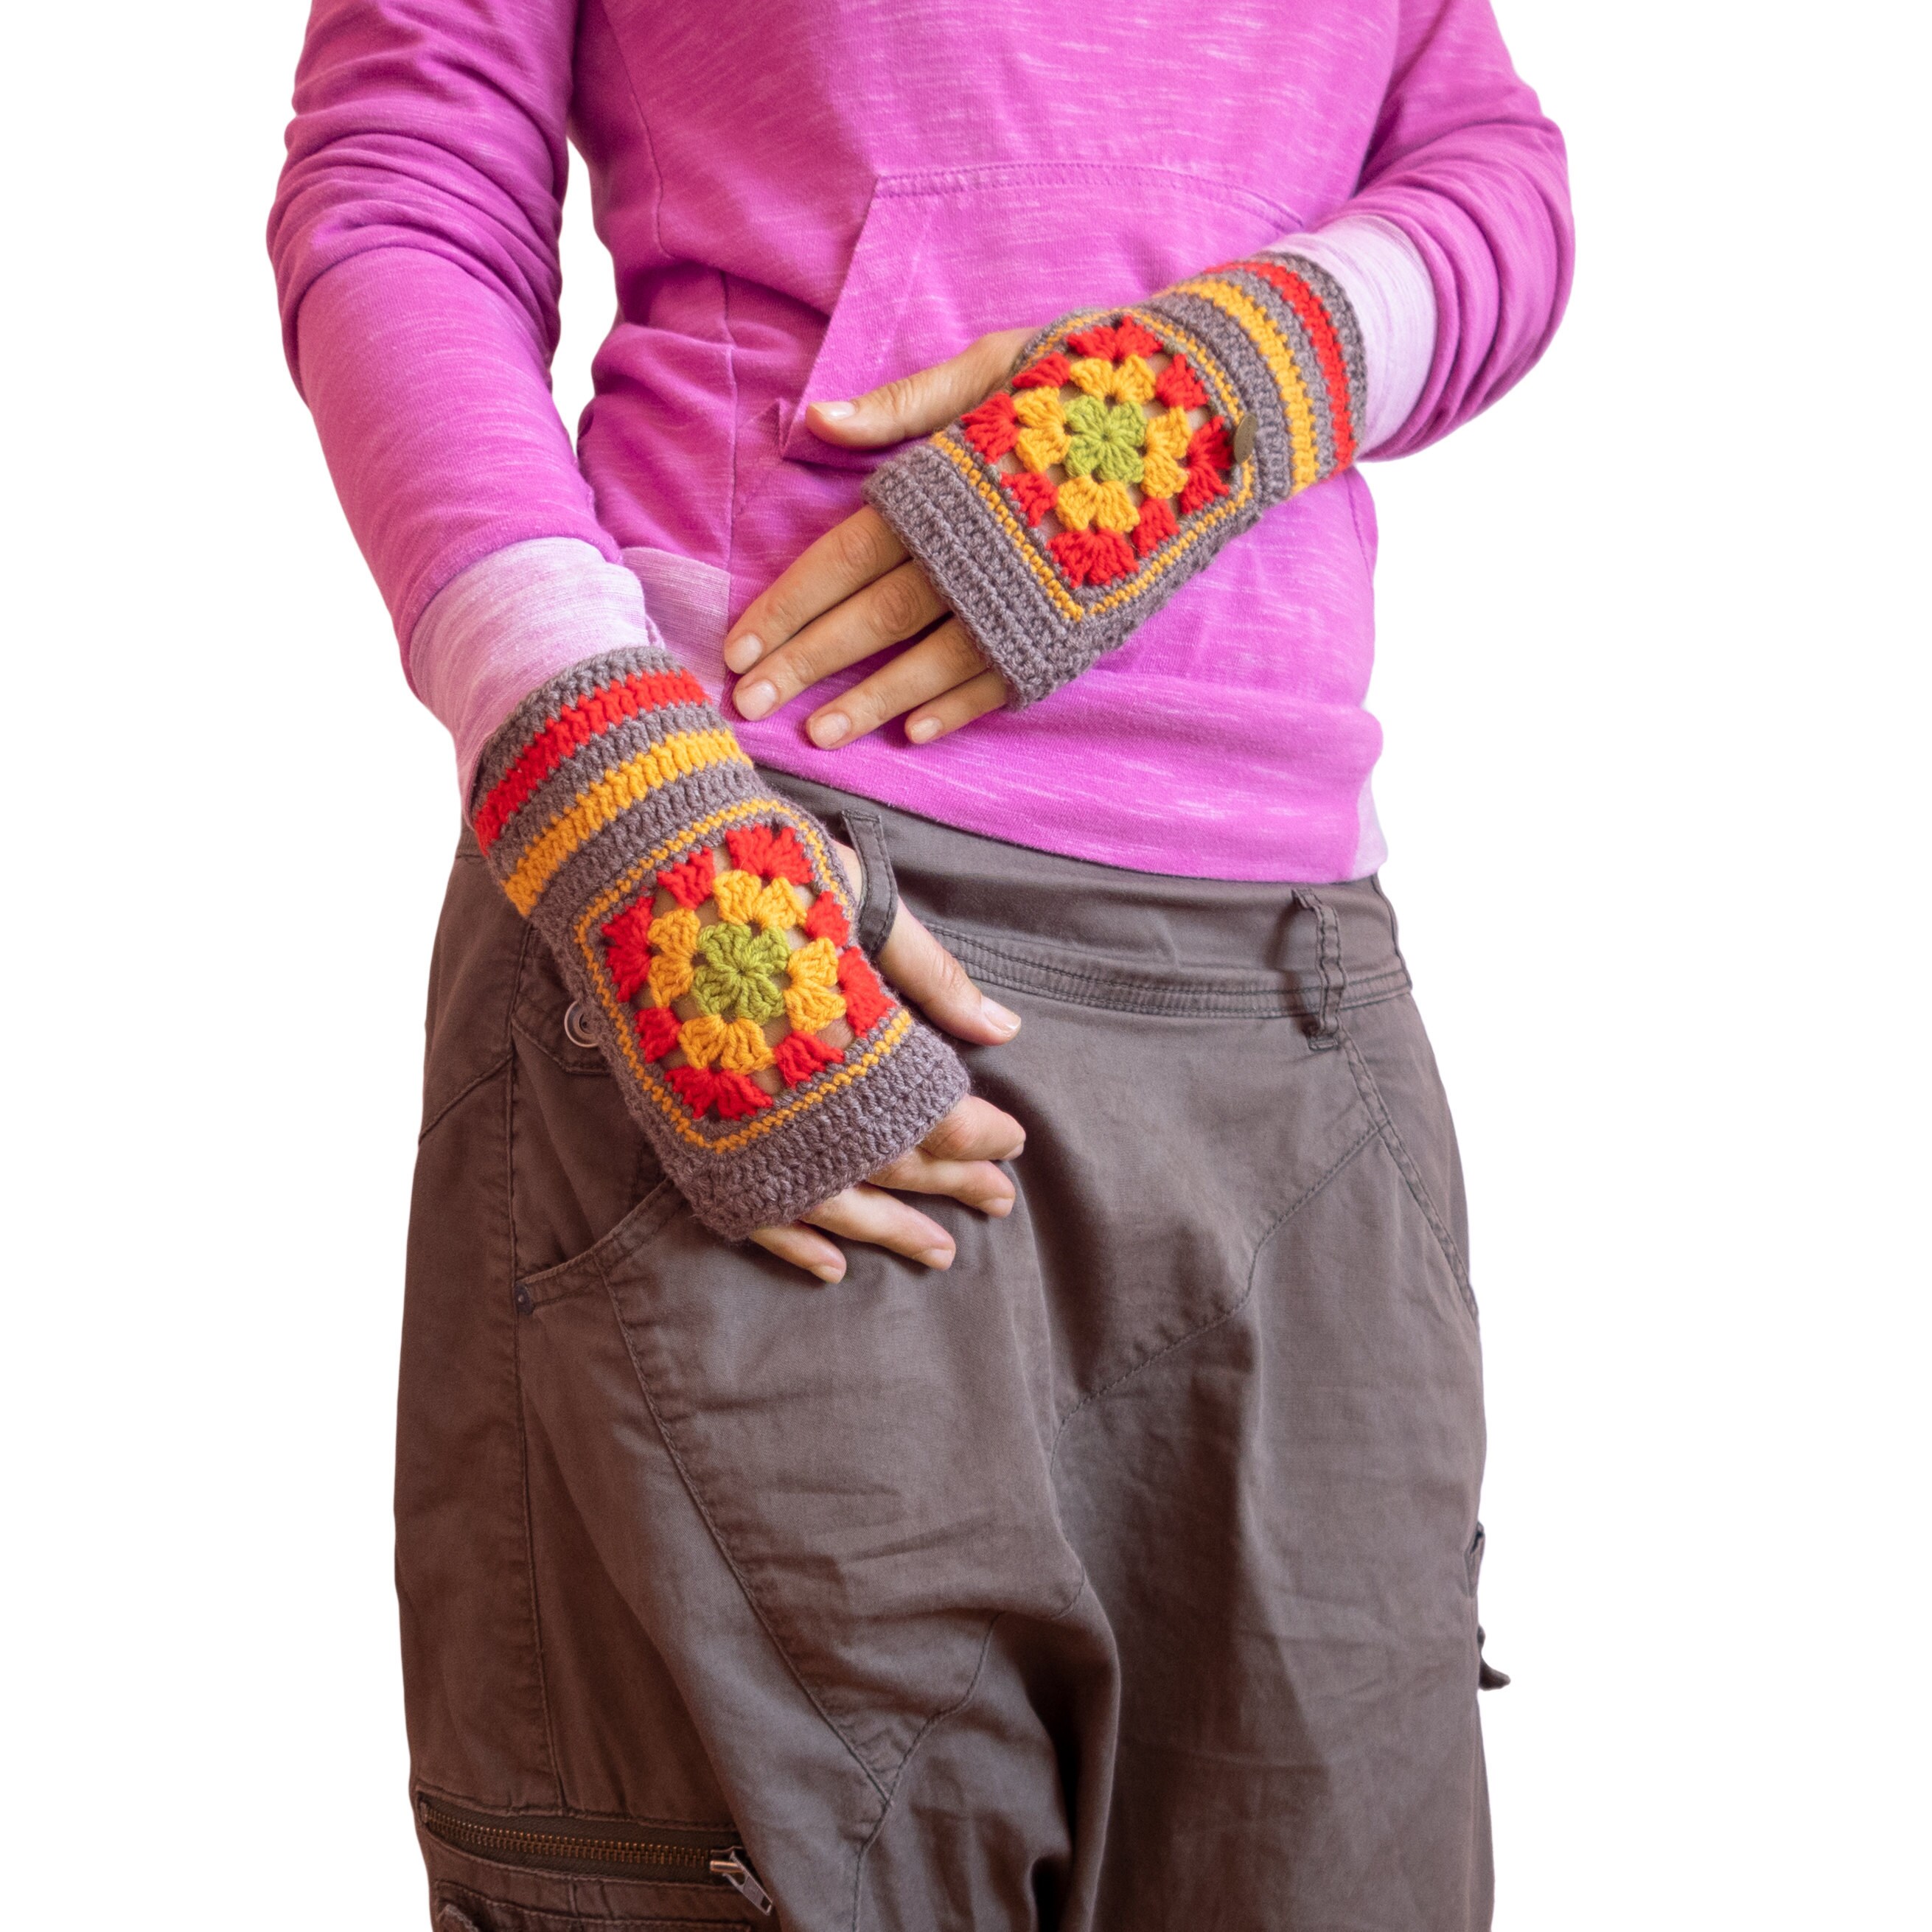 handmade gloves fingerless for ladies with granny squares of cashmere